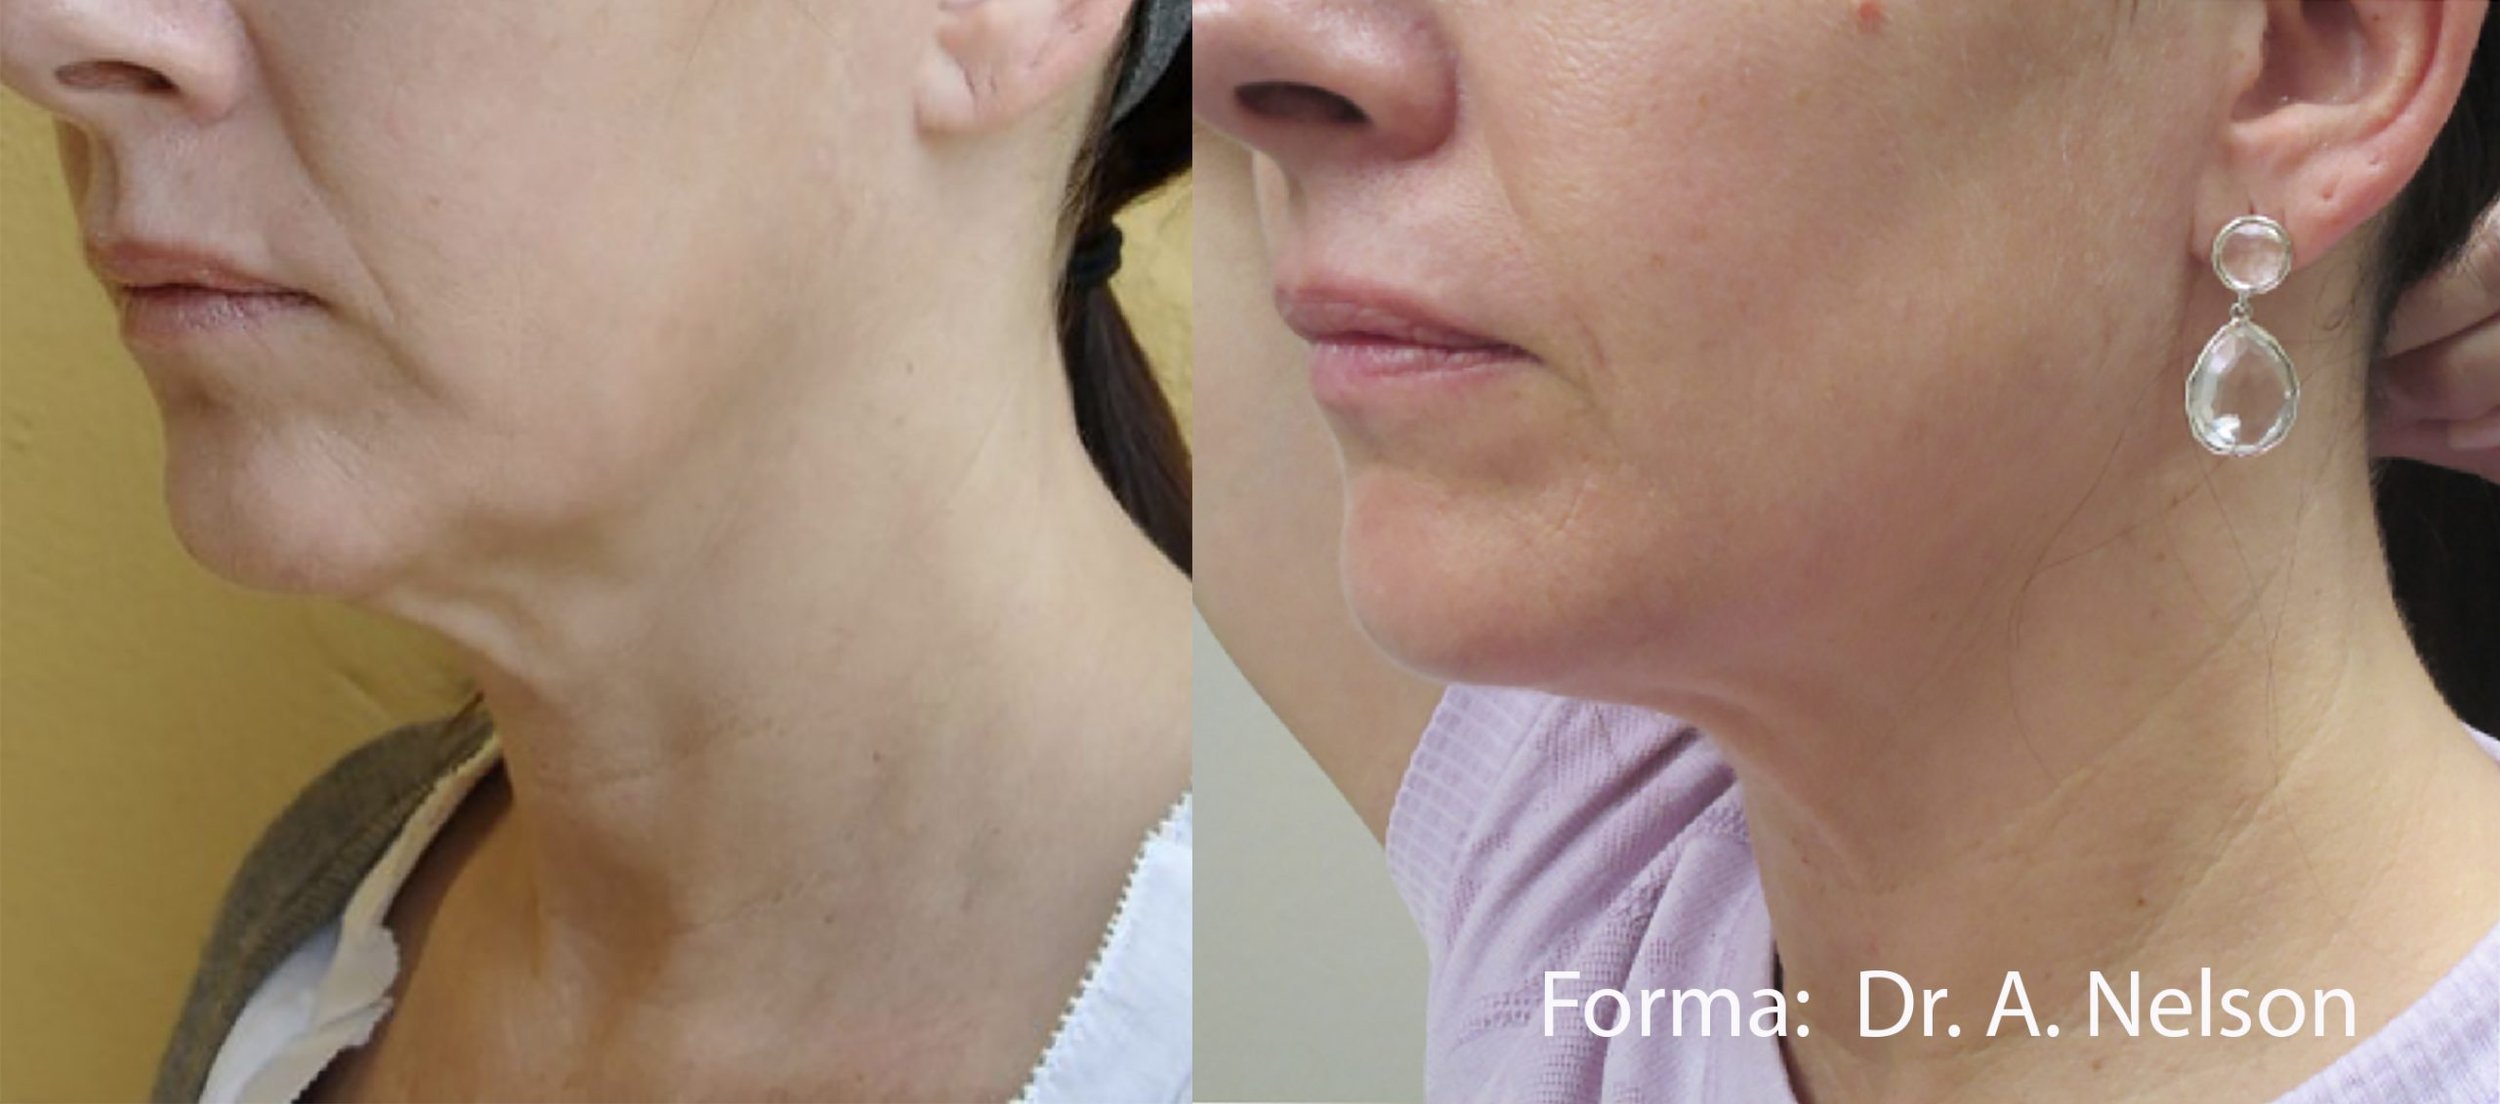 forma-before-after-dr-a-nelson-preview-1.jpg